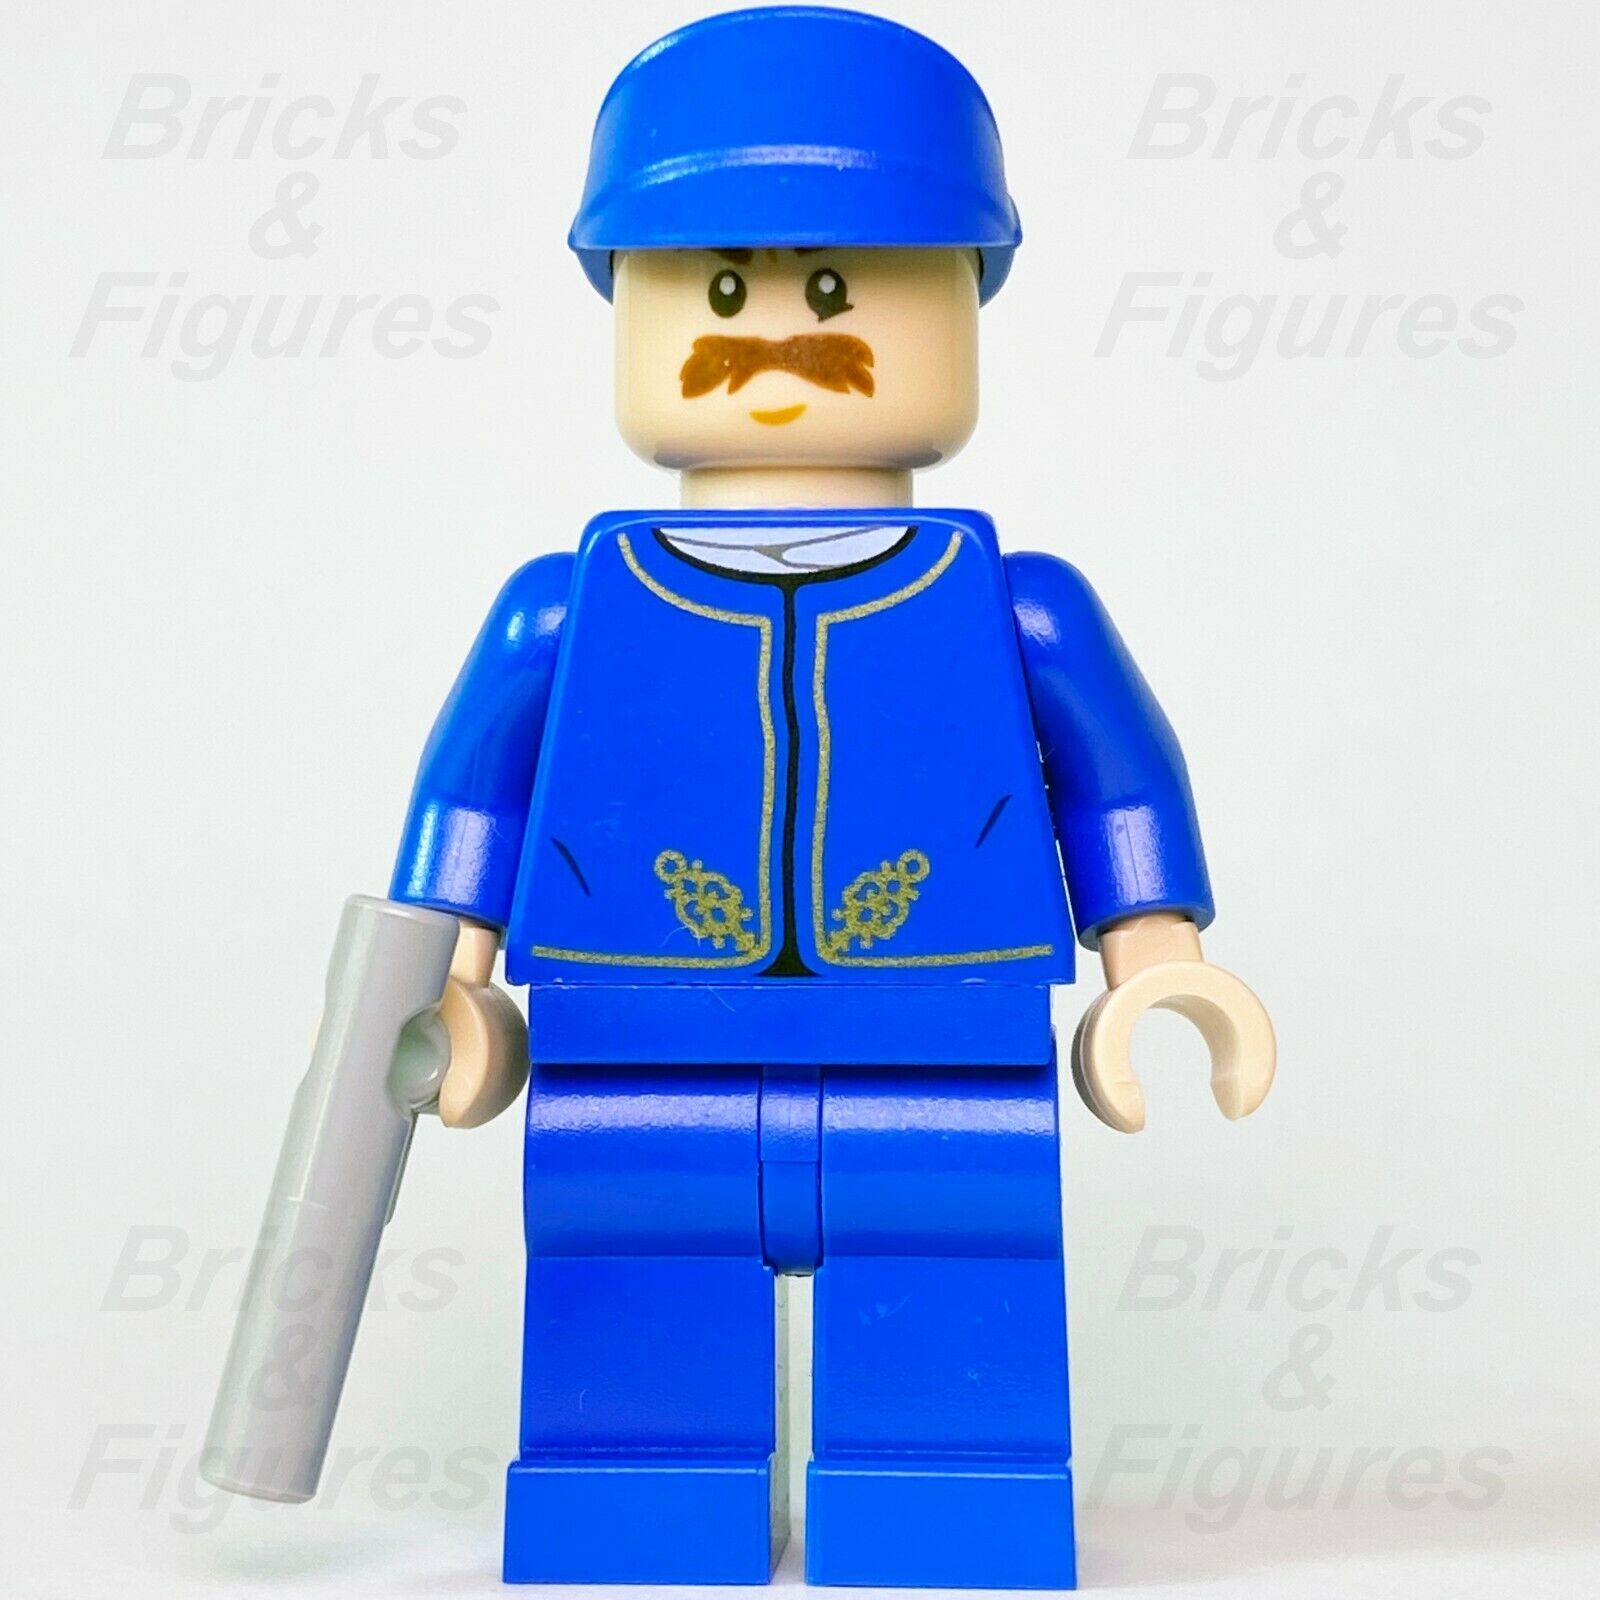 New Star Wars LEGO Bespin Guard with Moustache Cloud City Minifigure 75222 - Bricks & Figures